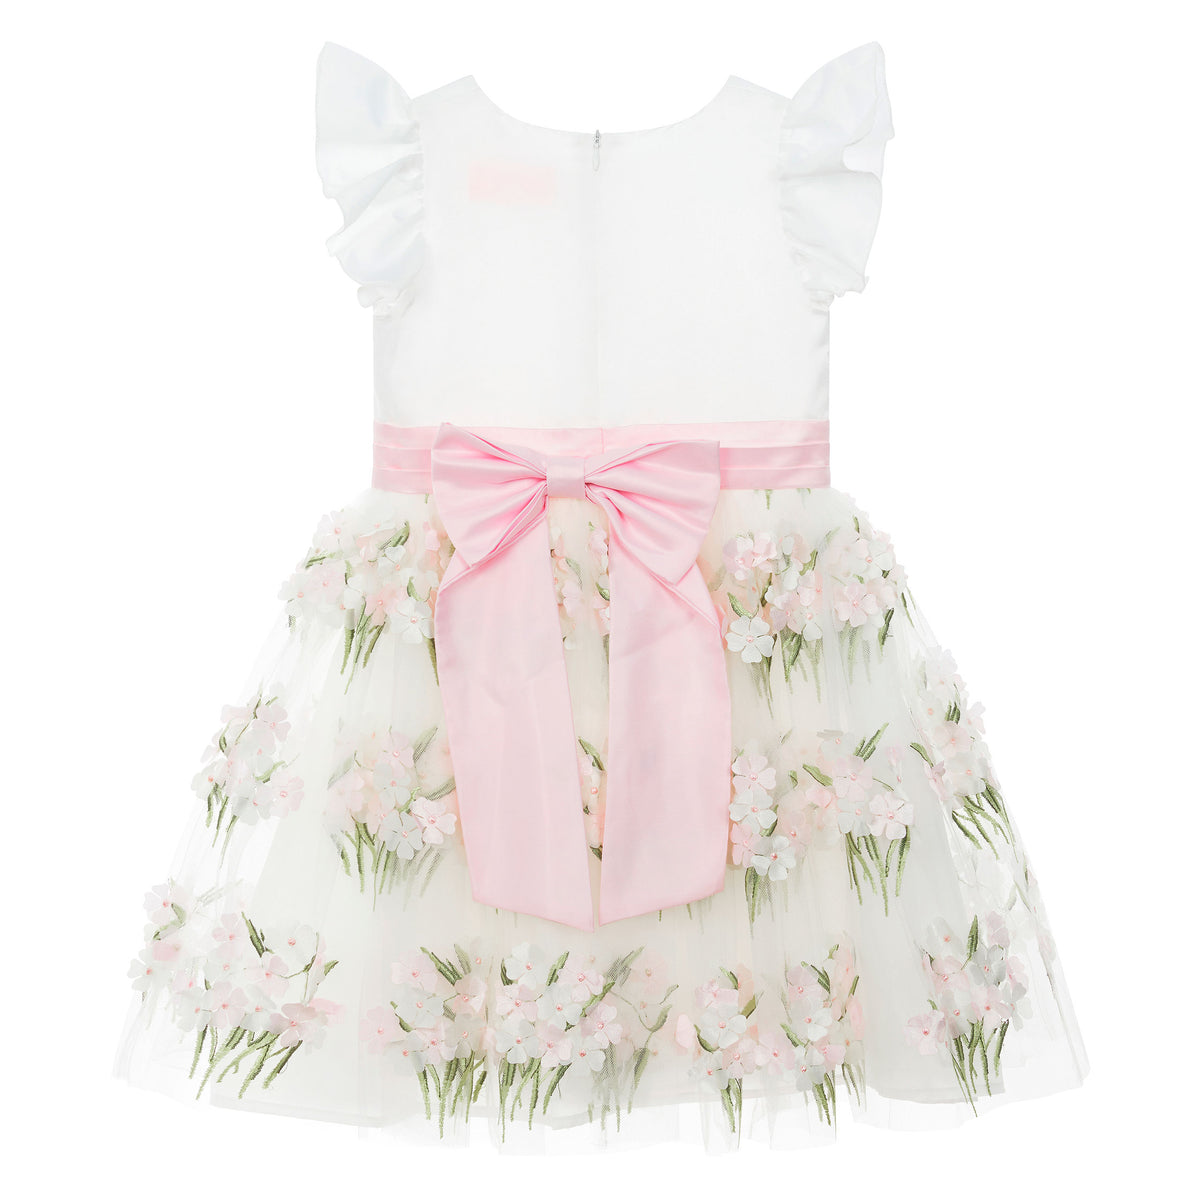 Clemmie Floral Embellished Girls Occasion Dress White & Pink | Holly Hastie London